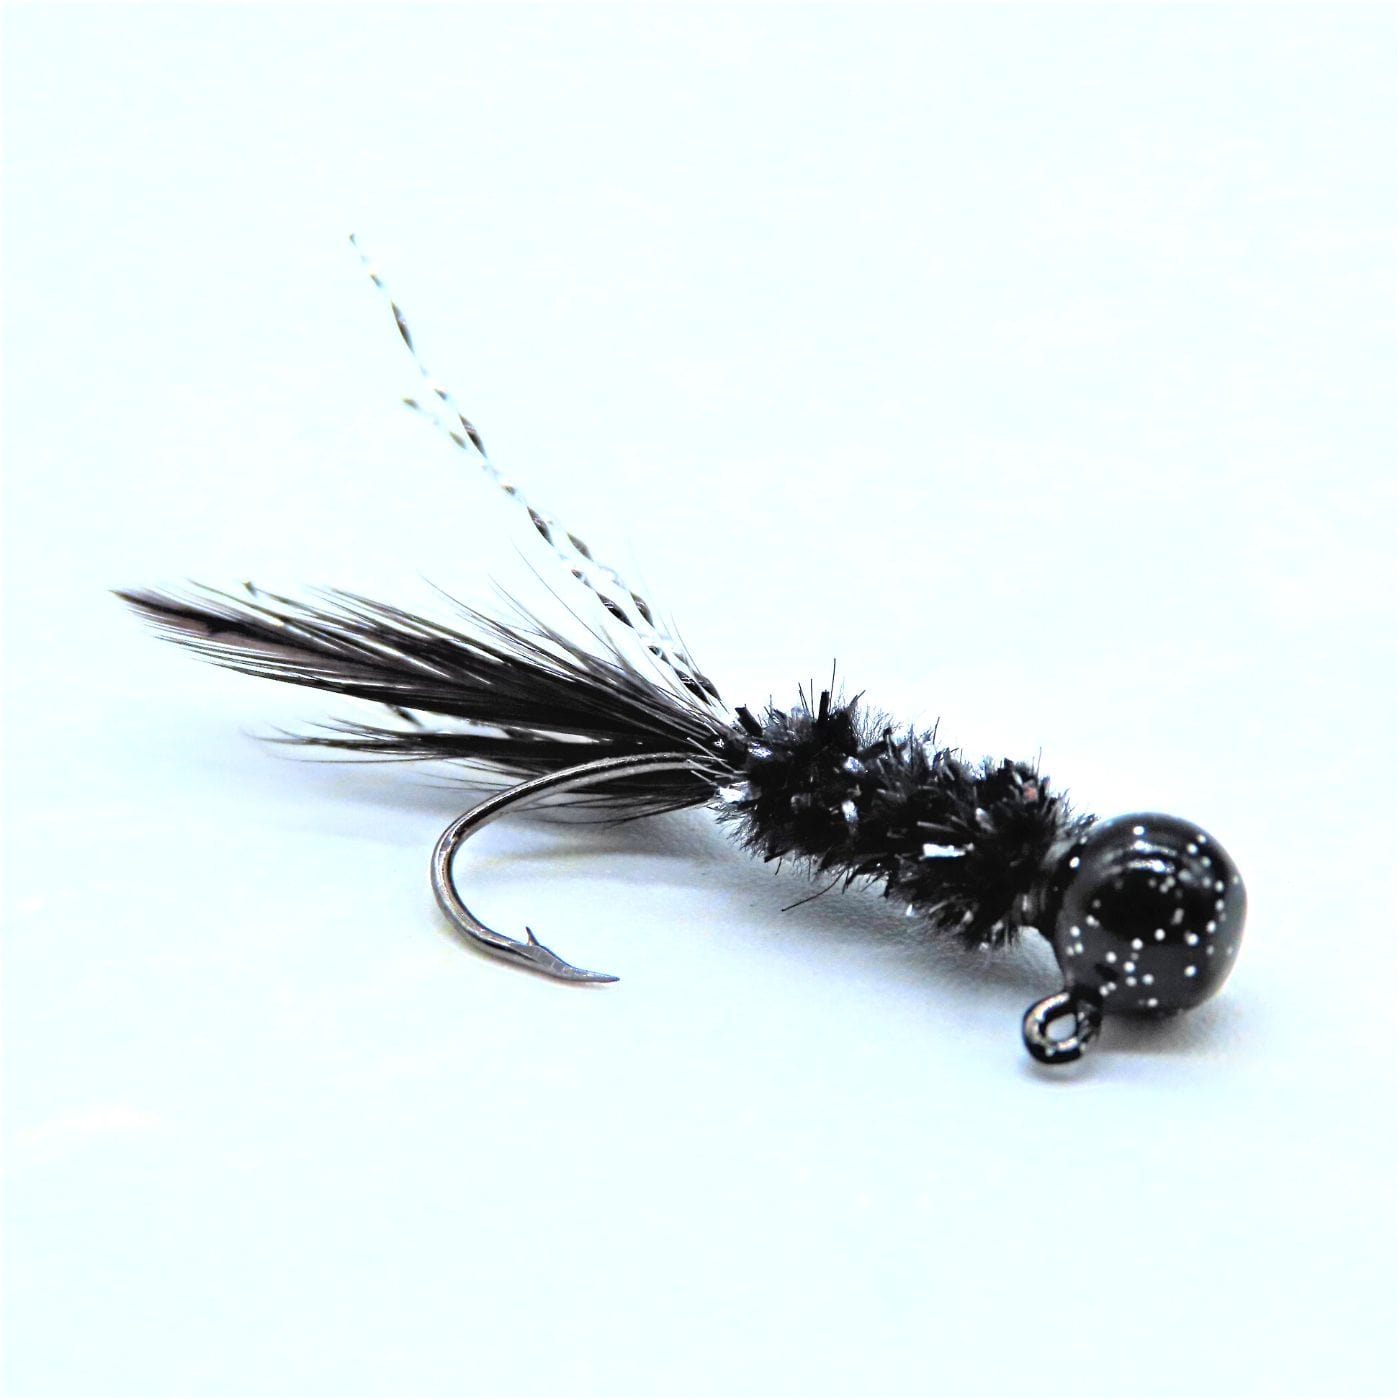 Hand tied Crappie jig featuring a Round black jig head,black and silver flash chenille, black hackle tail and silver krystal flash. Hand tied onto a #4 Mustad sickle hook by Ramble Tamble Tackle.